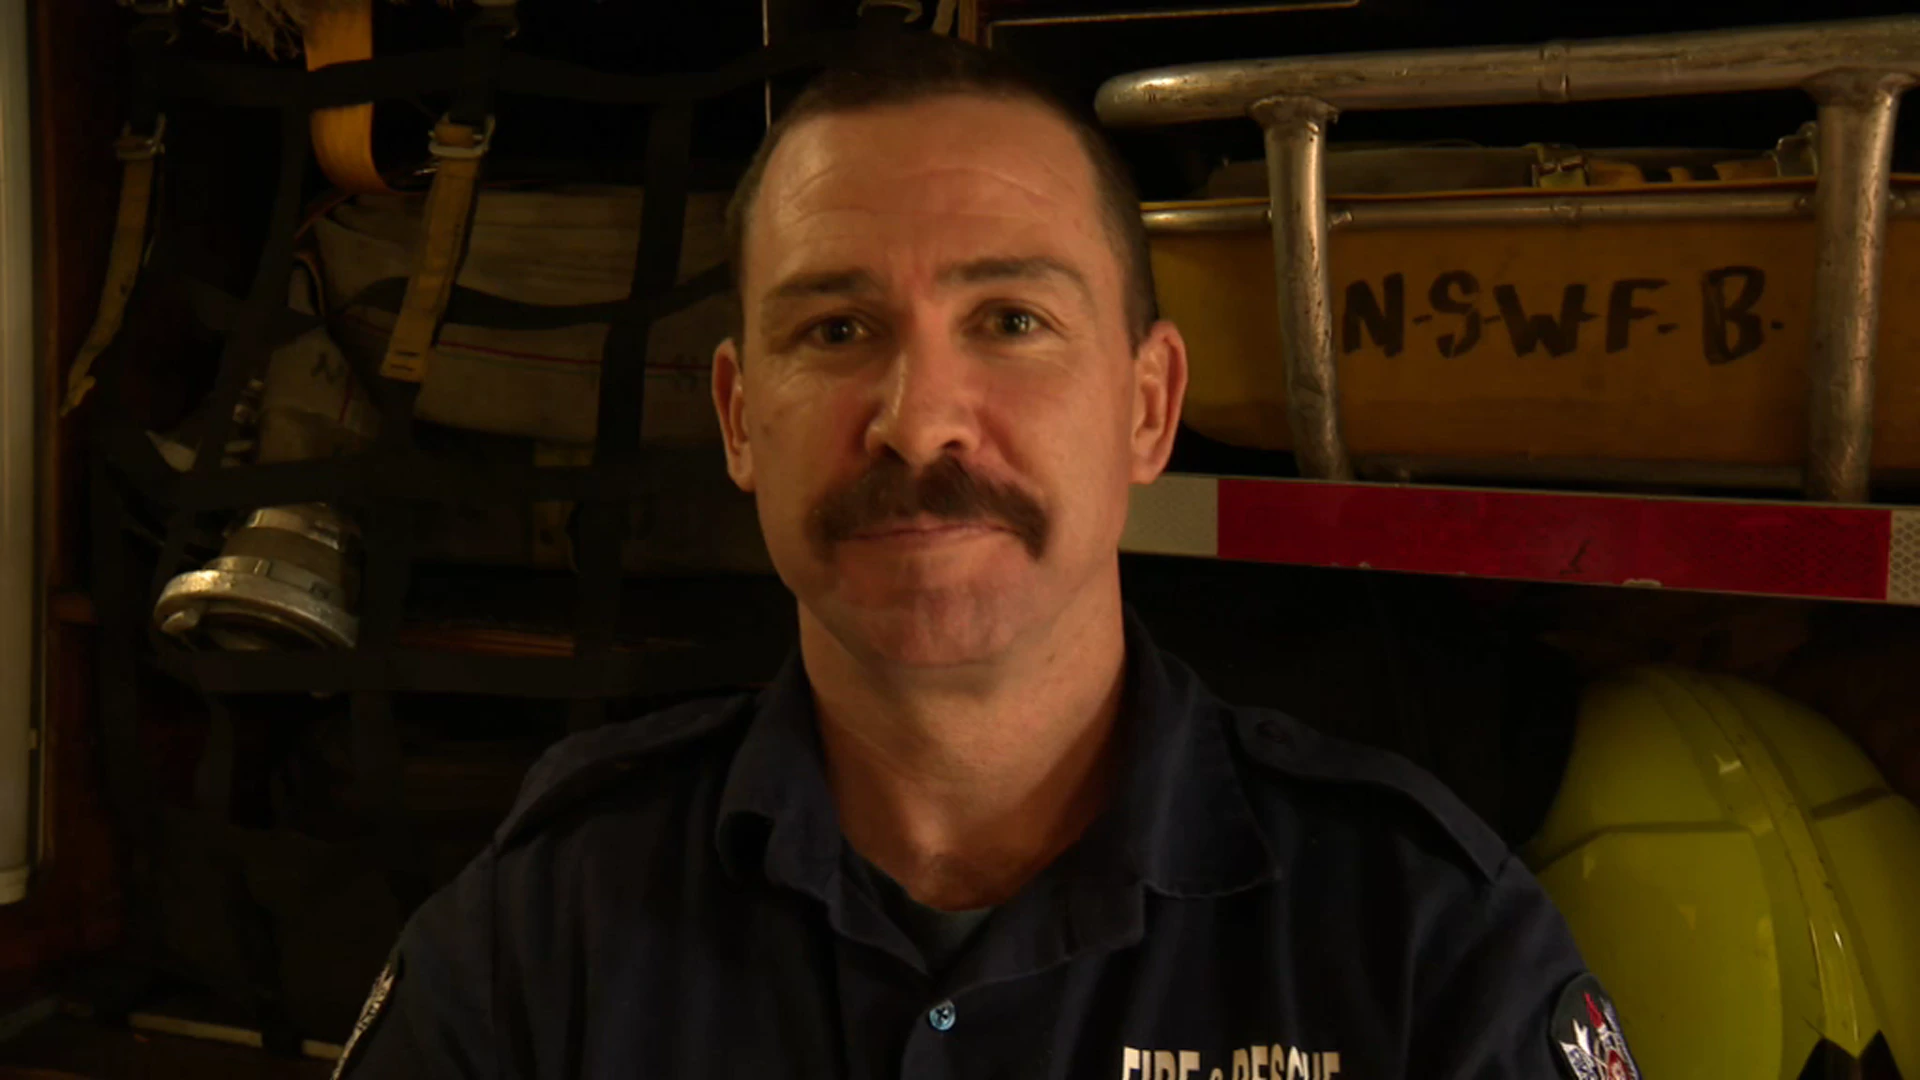 Steve Dingle said he became a firefighter because he wanted to be a positive role model.